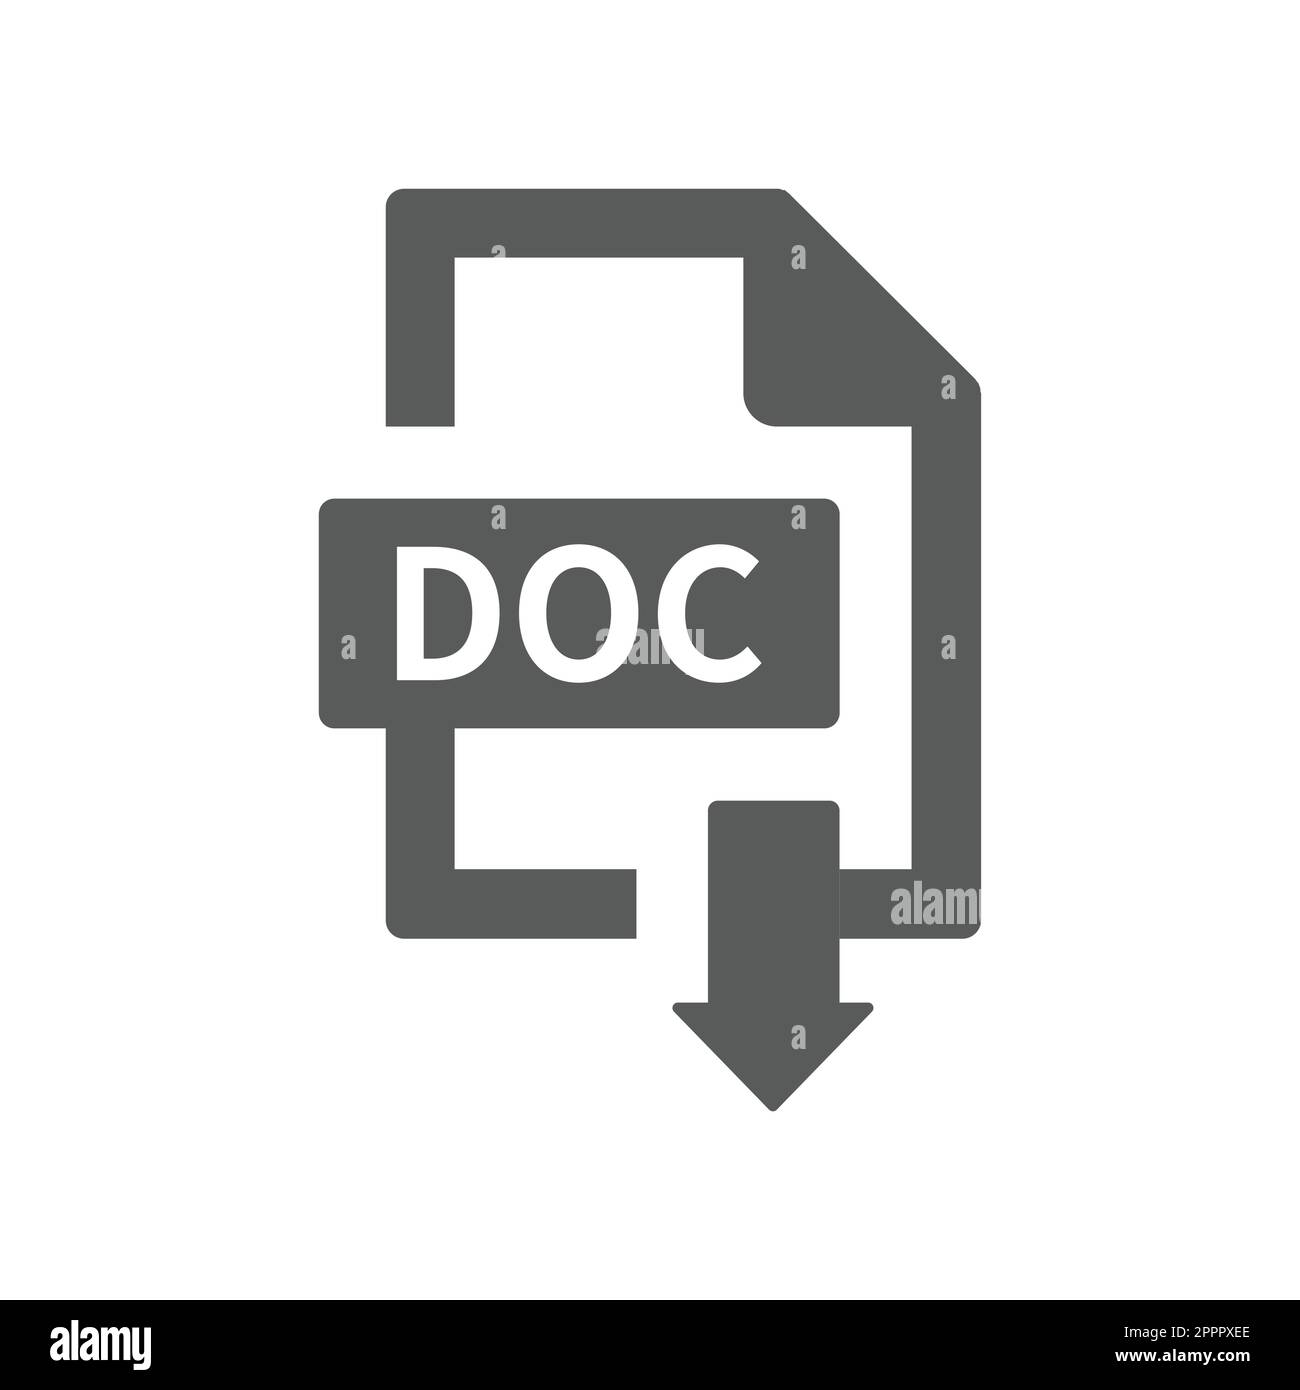 Document file format vector icon Stock Vector